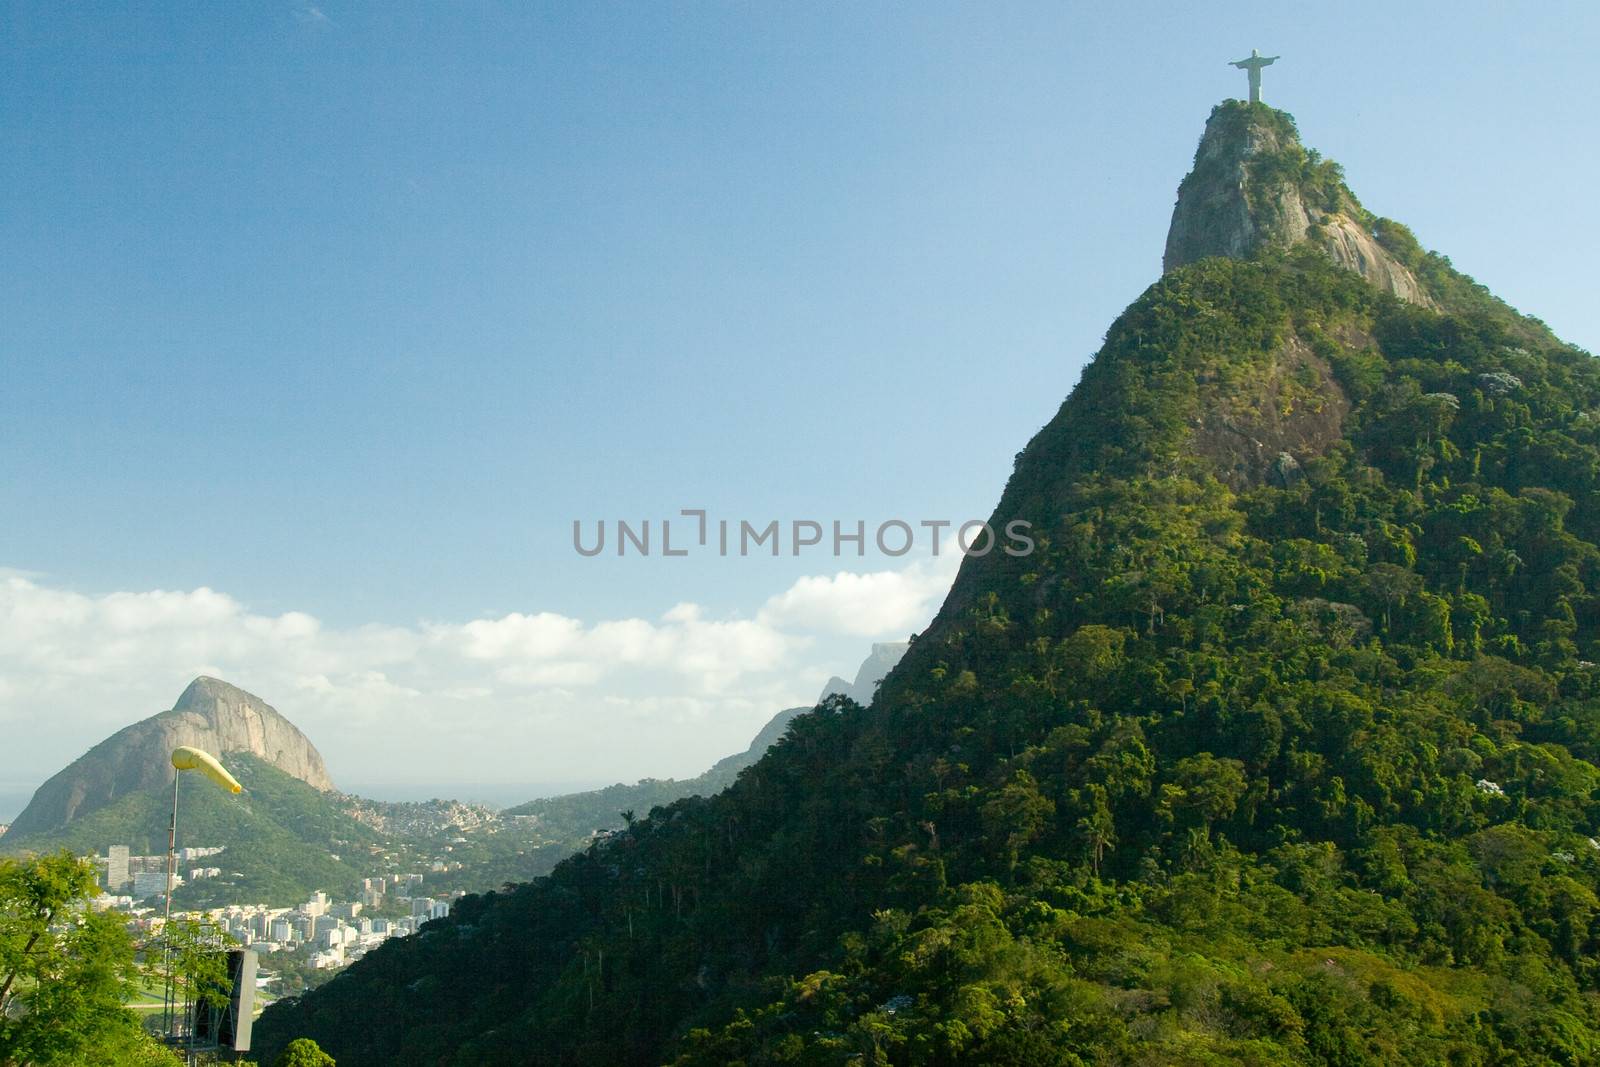 Christ the Redeemer on Corcovado Mountain by CelsoDiniz